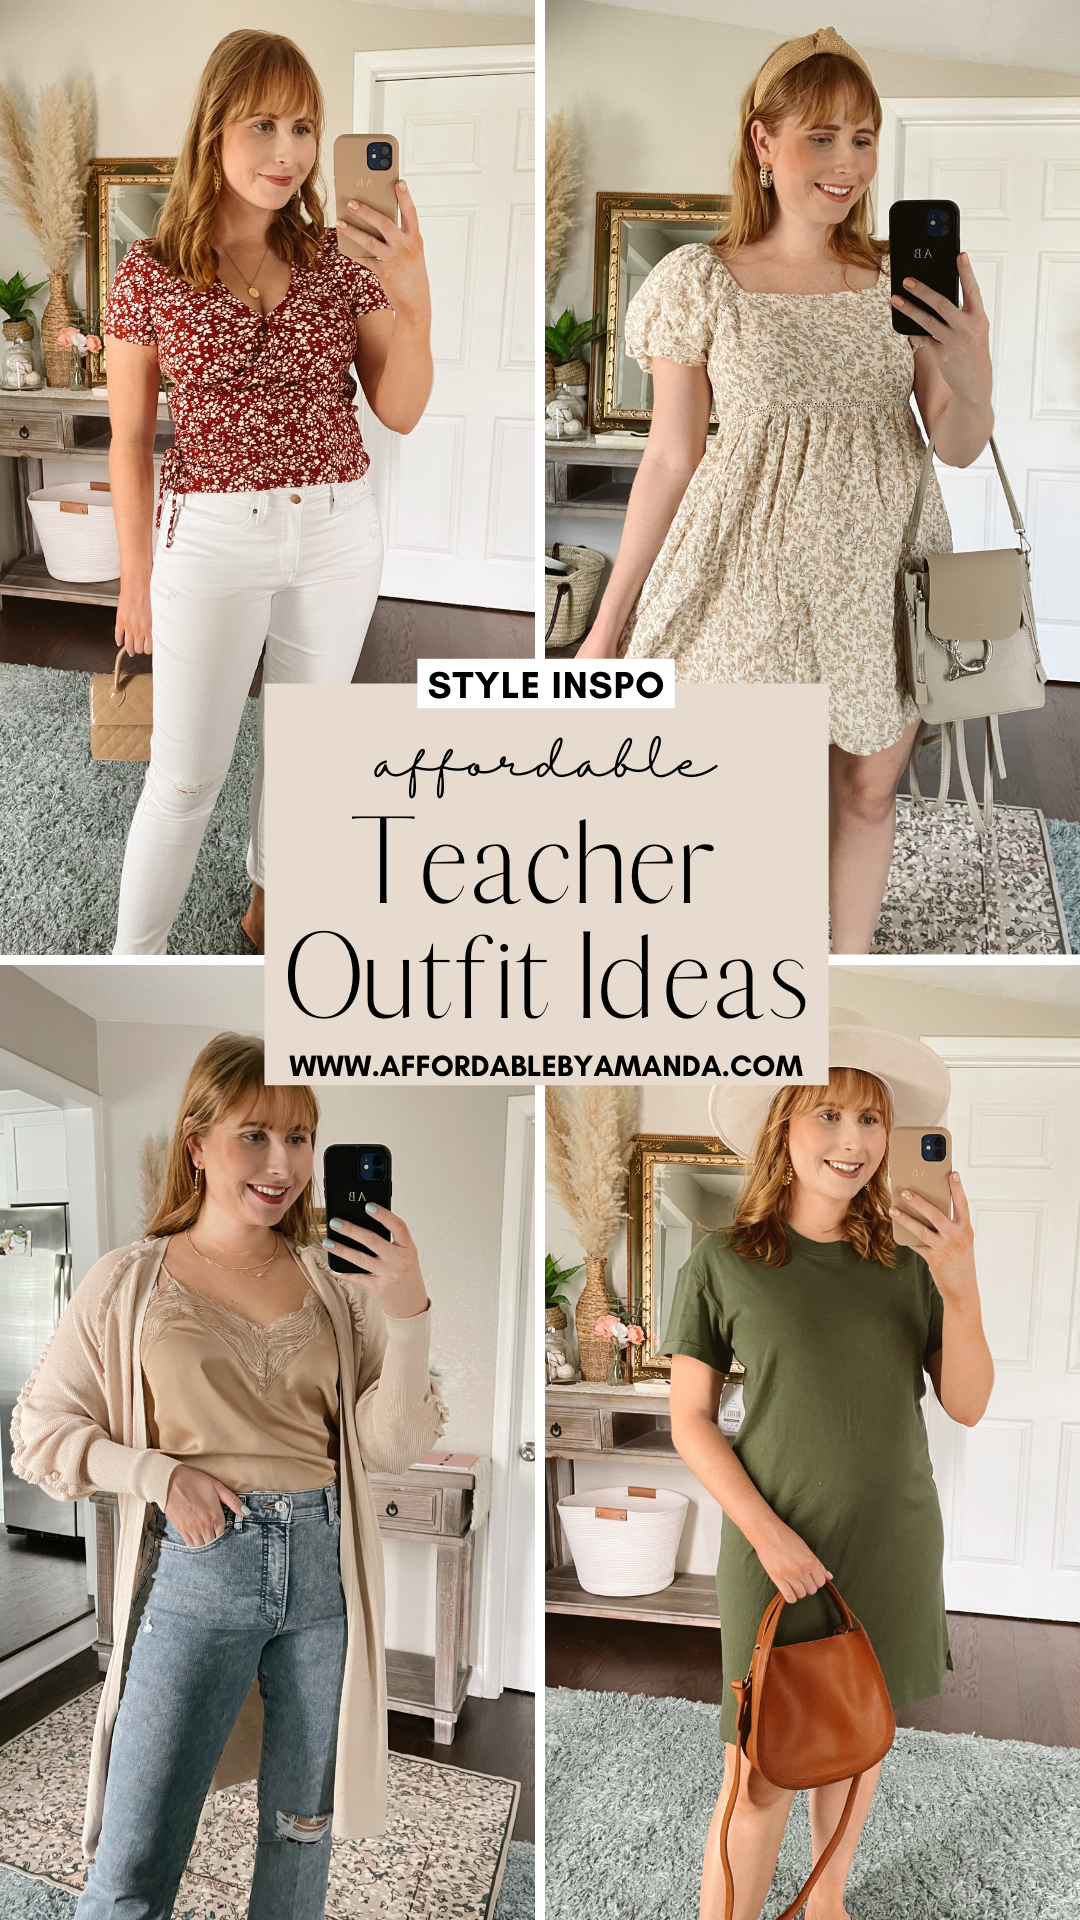 Affordable Back to School Teacher Outfits. Cute Teacher Outfits & Business Casual Work Outfits. Teacher Outfit Ideas. Affordable by Amanda